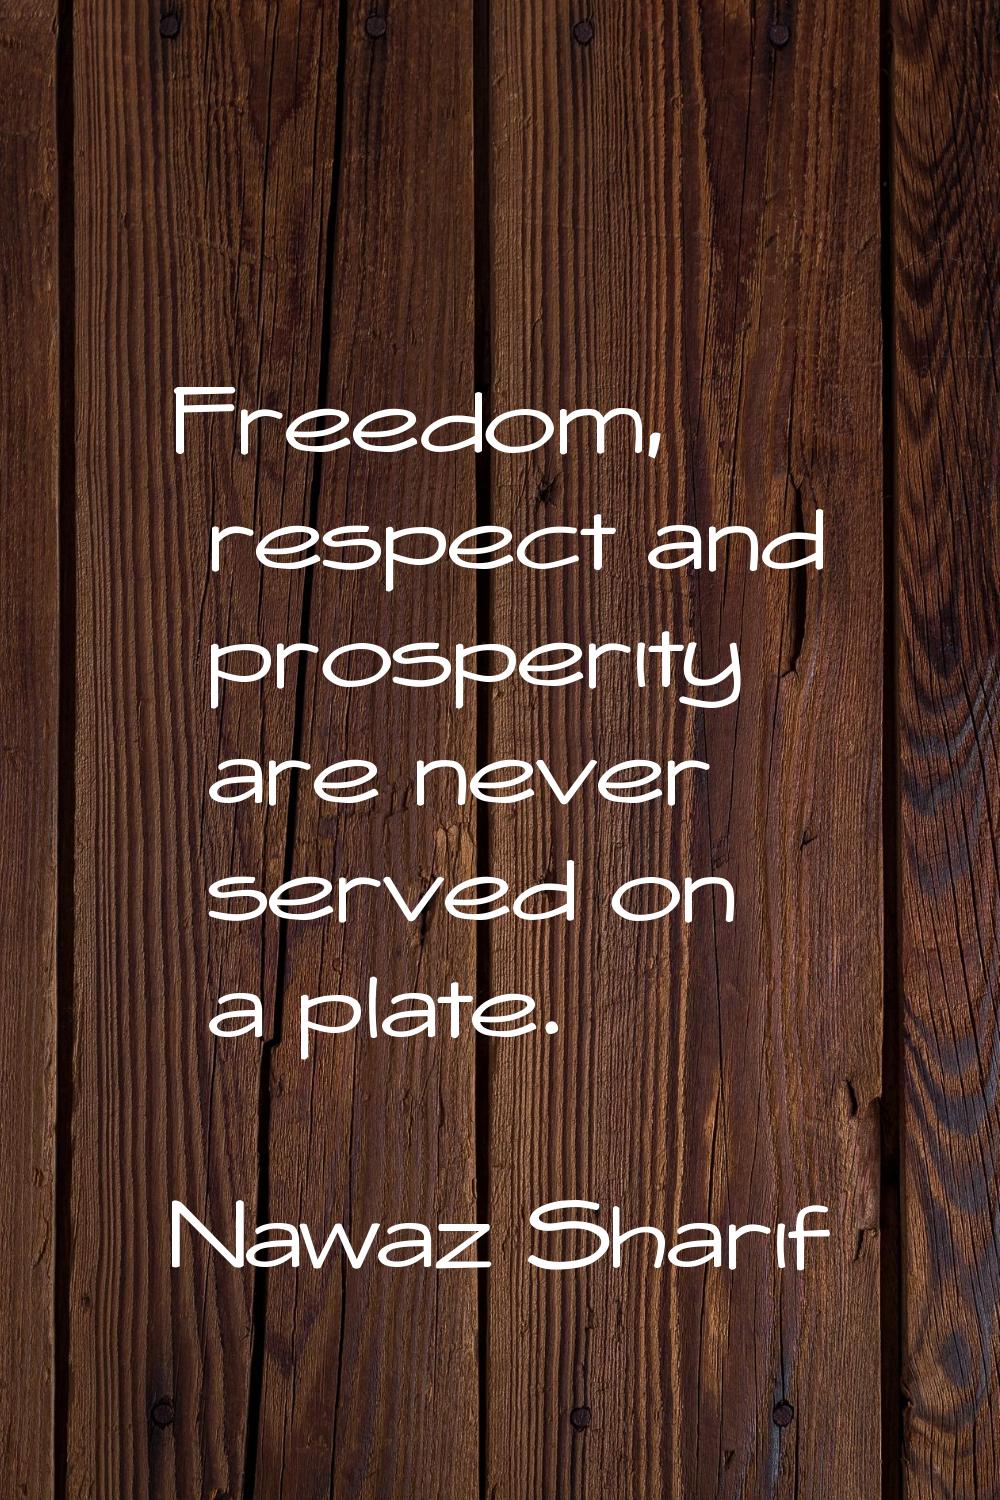 Freedom, respect and prosperity are never served on a plate.